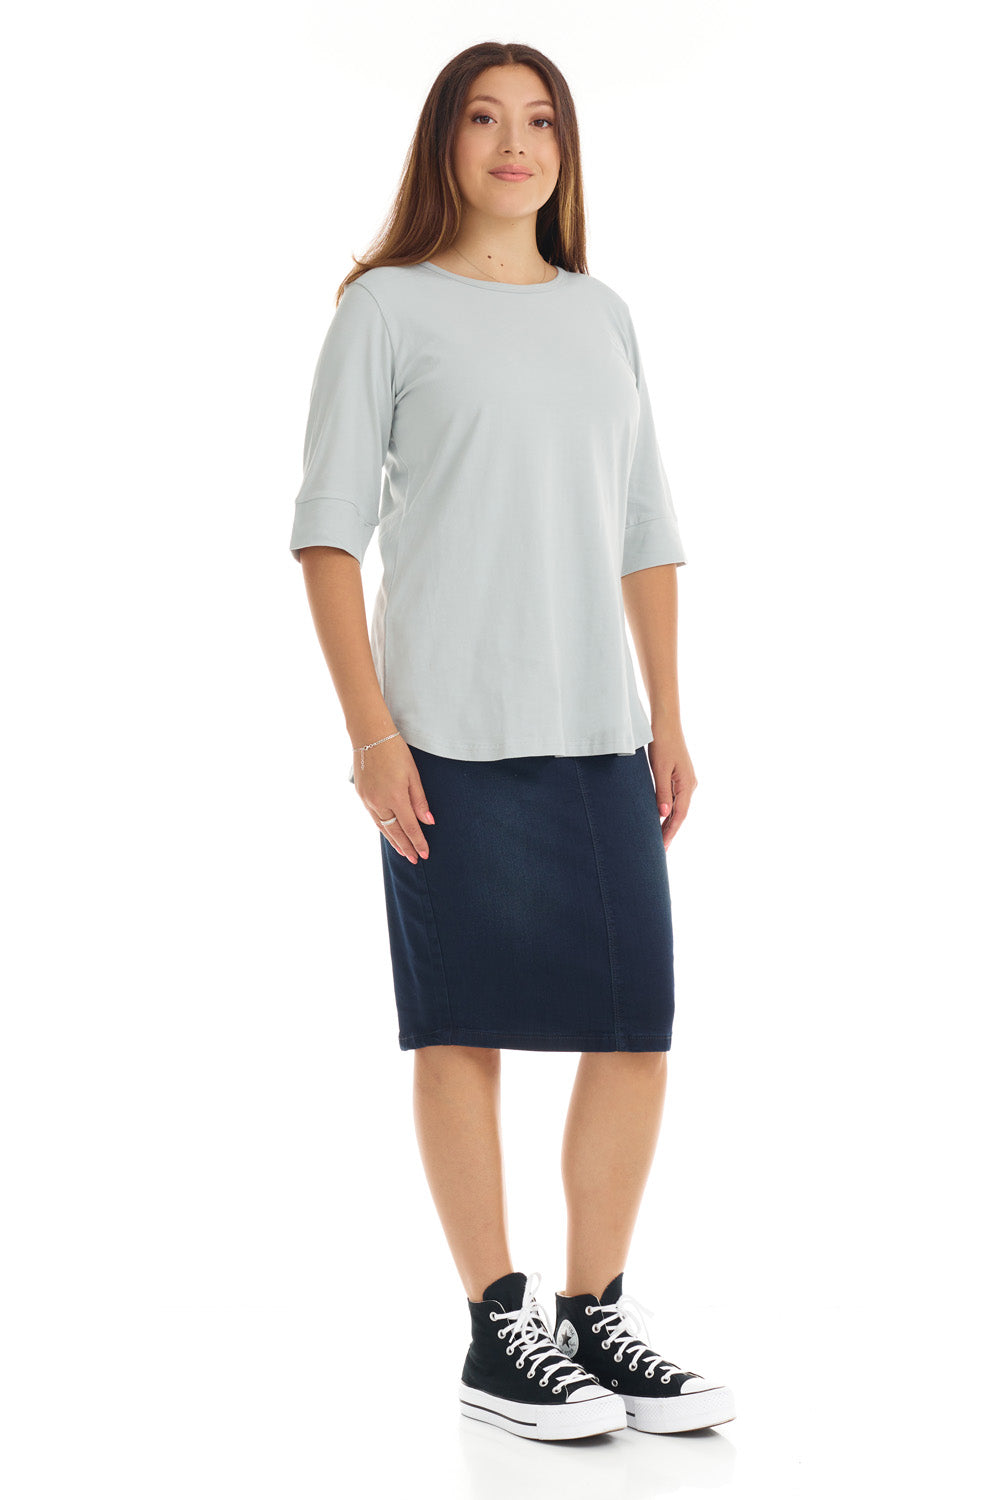 light gray crew neck top for women with cuff sleeve